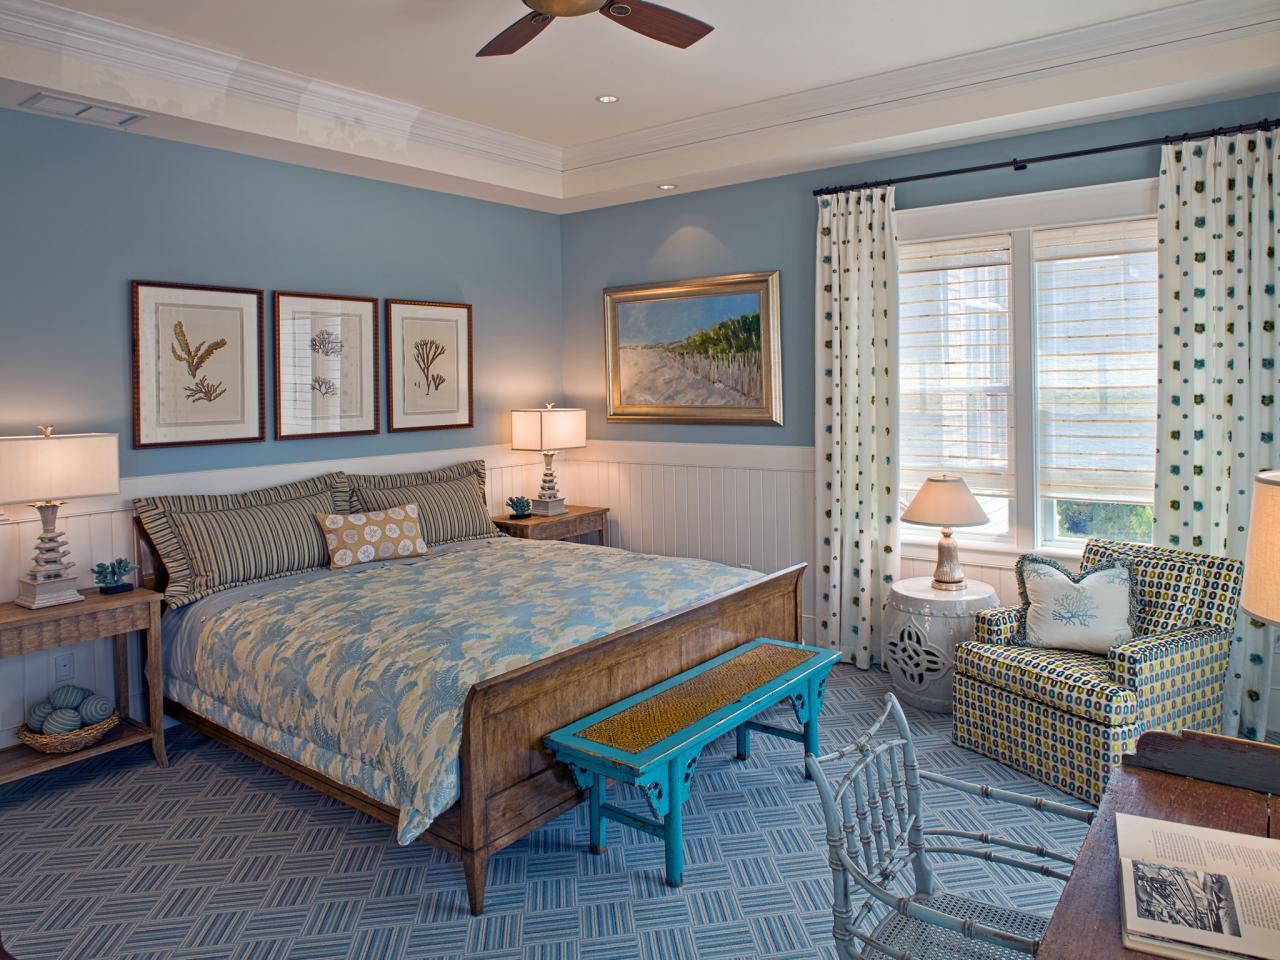 Decorating A Master Bedroom With Blue Walls